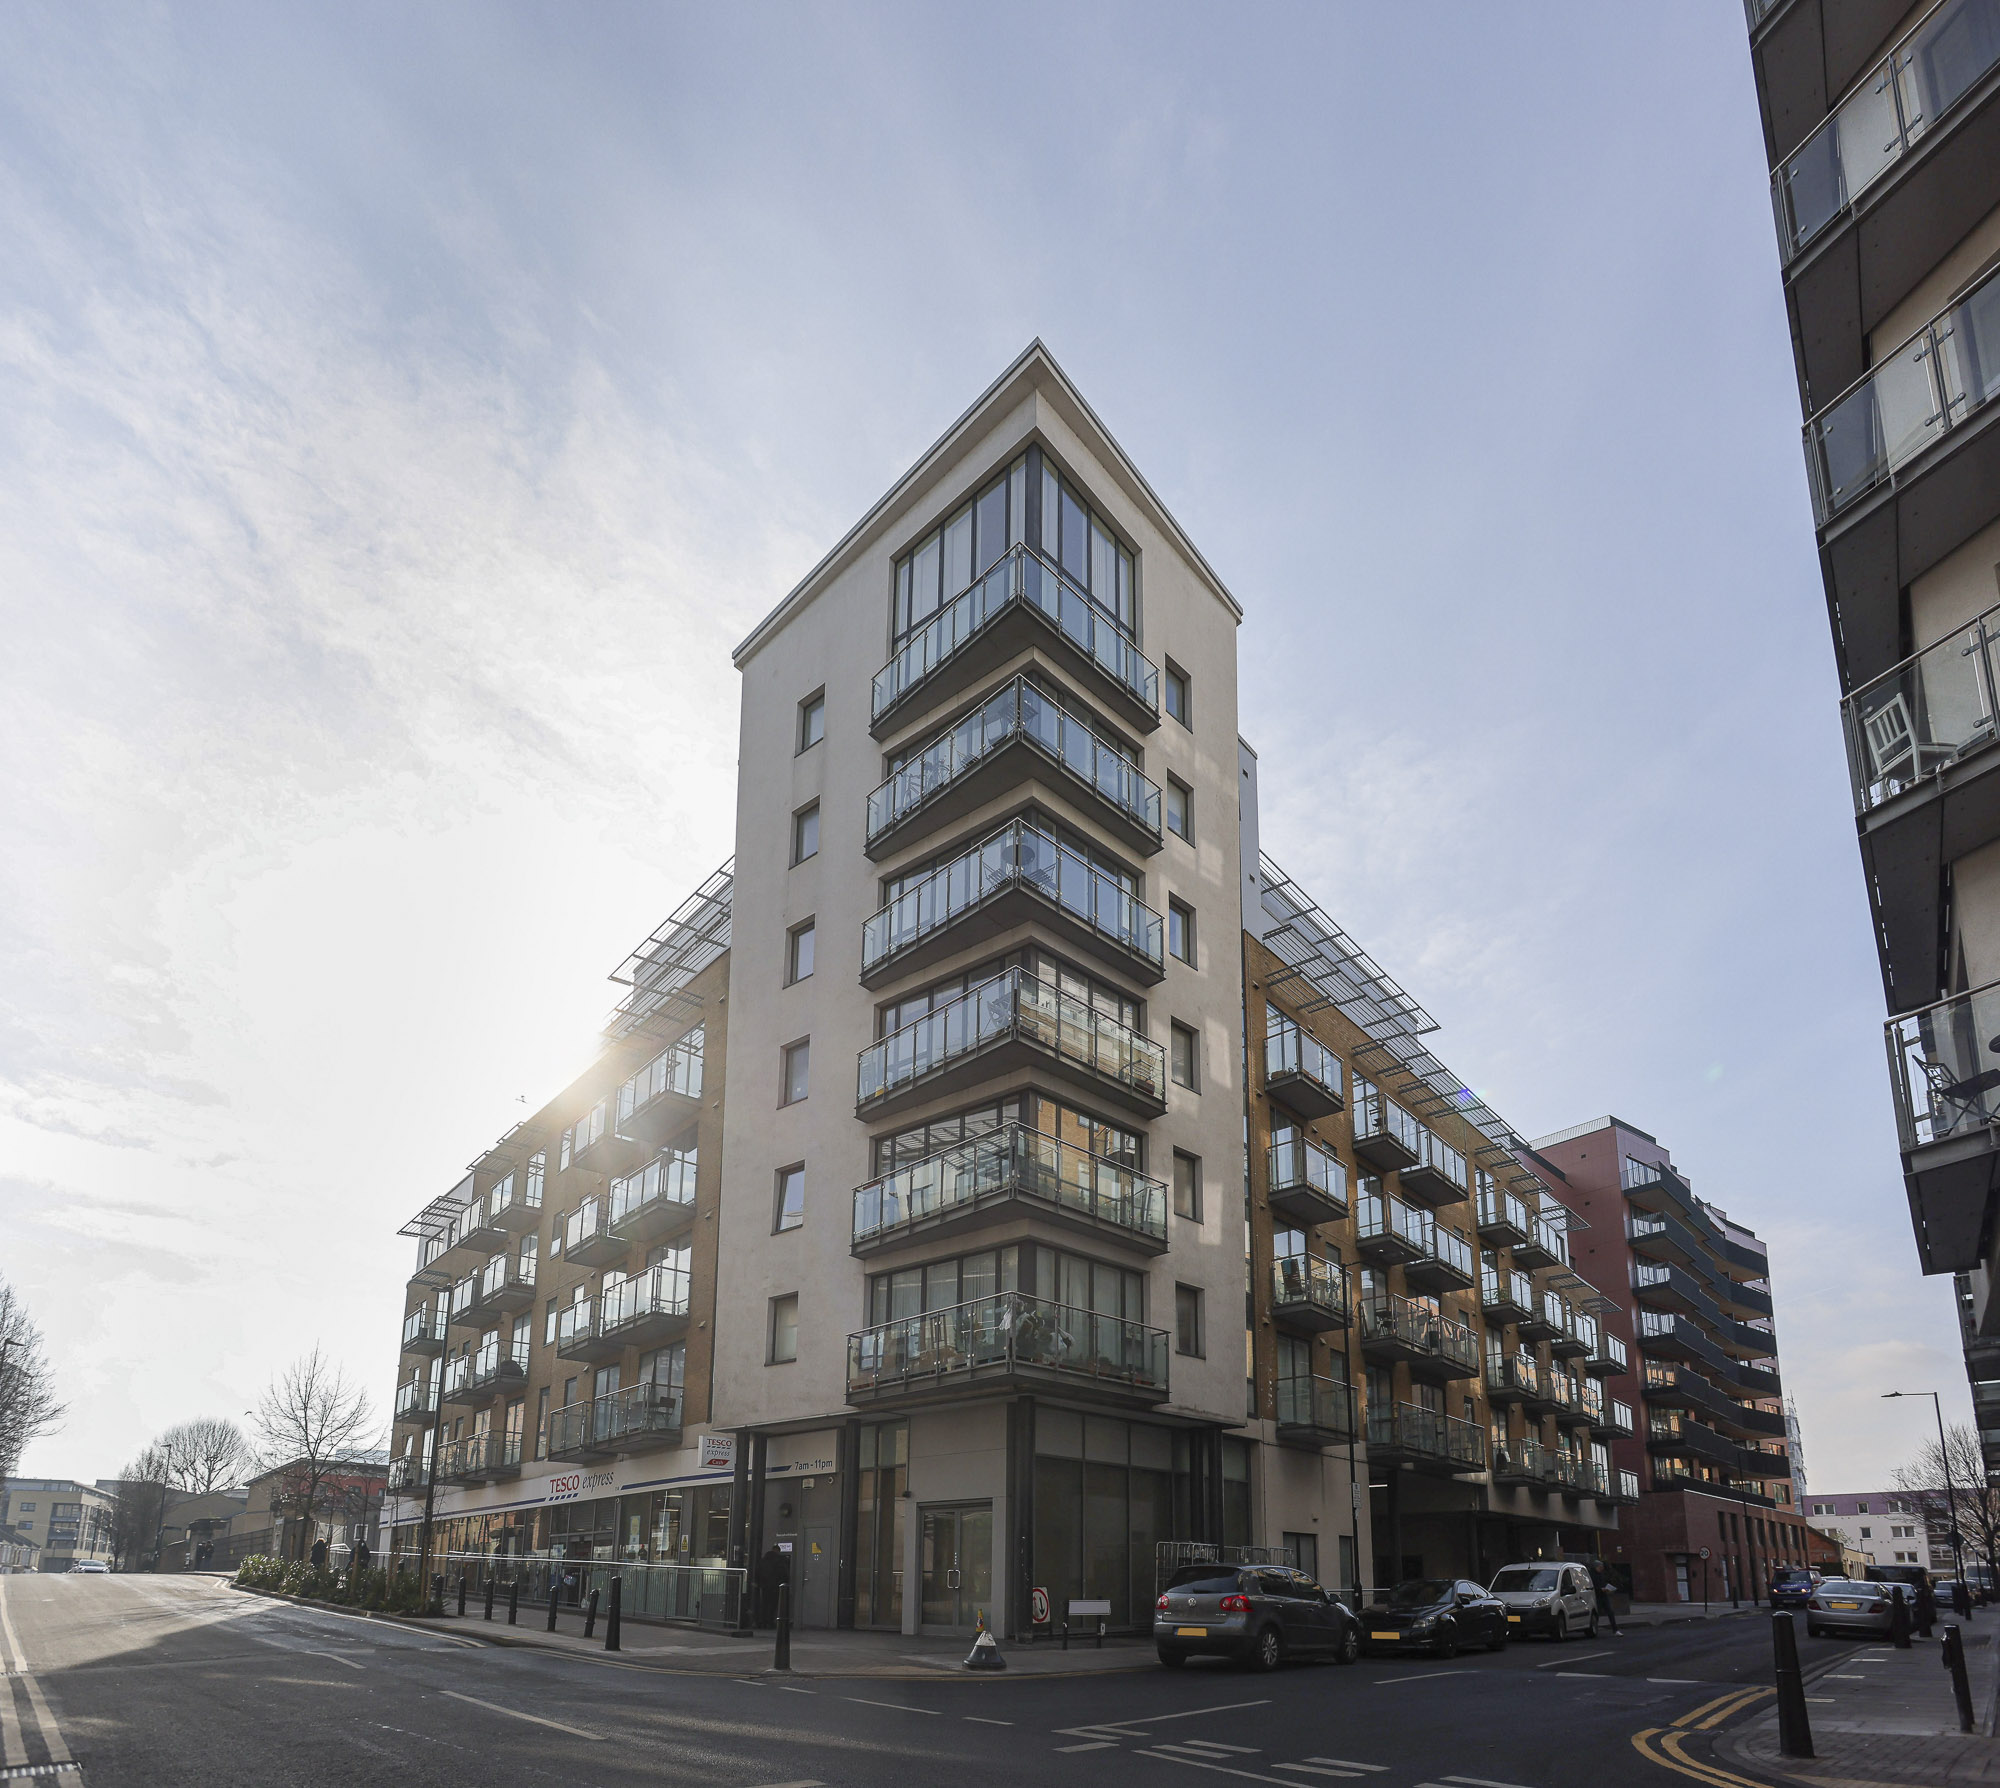 2 bedrooms apartments/flats to sale in Yeo Street, Bromley-By-Bow-image 1